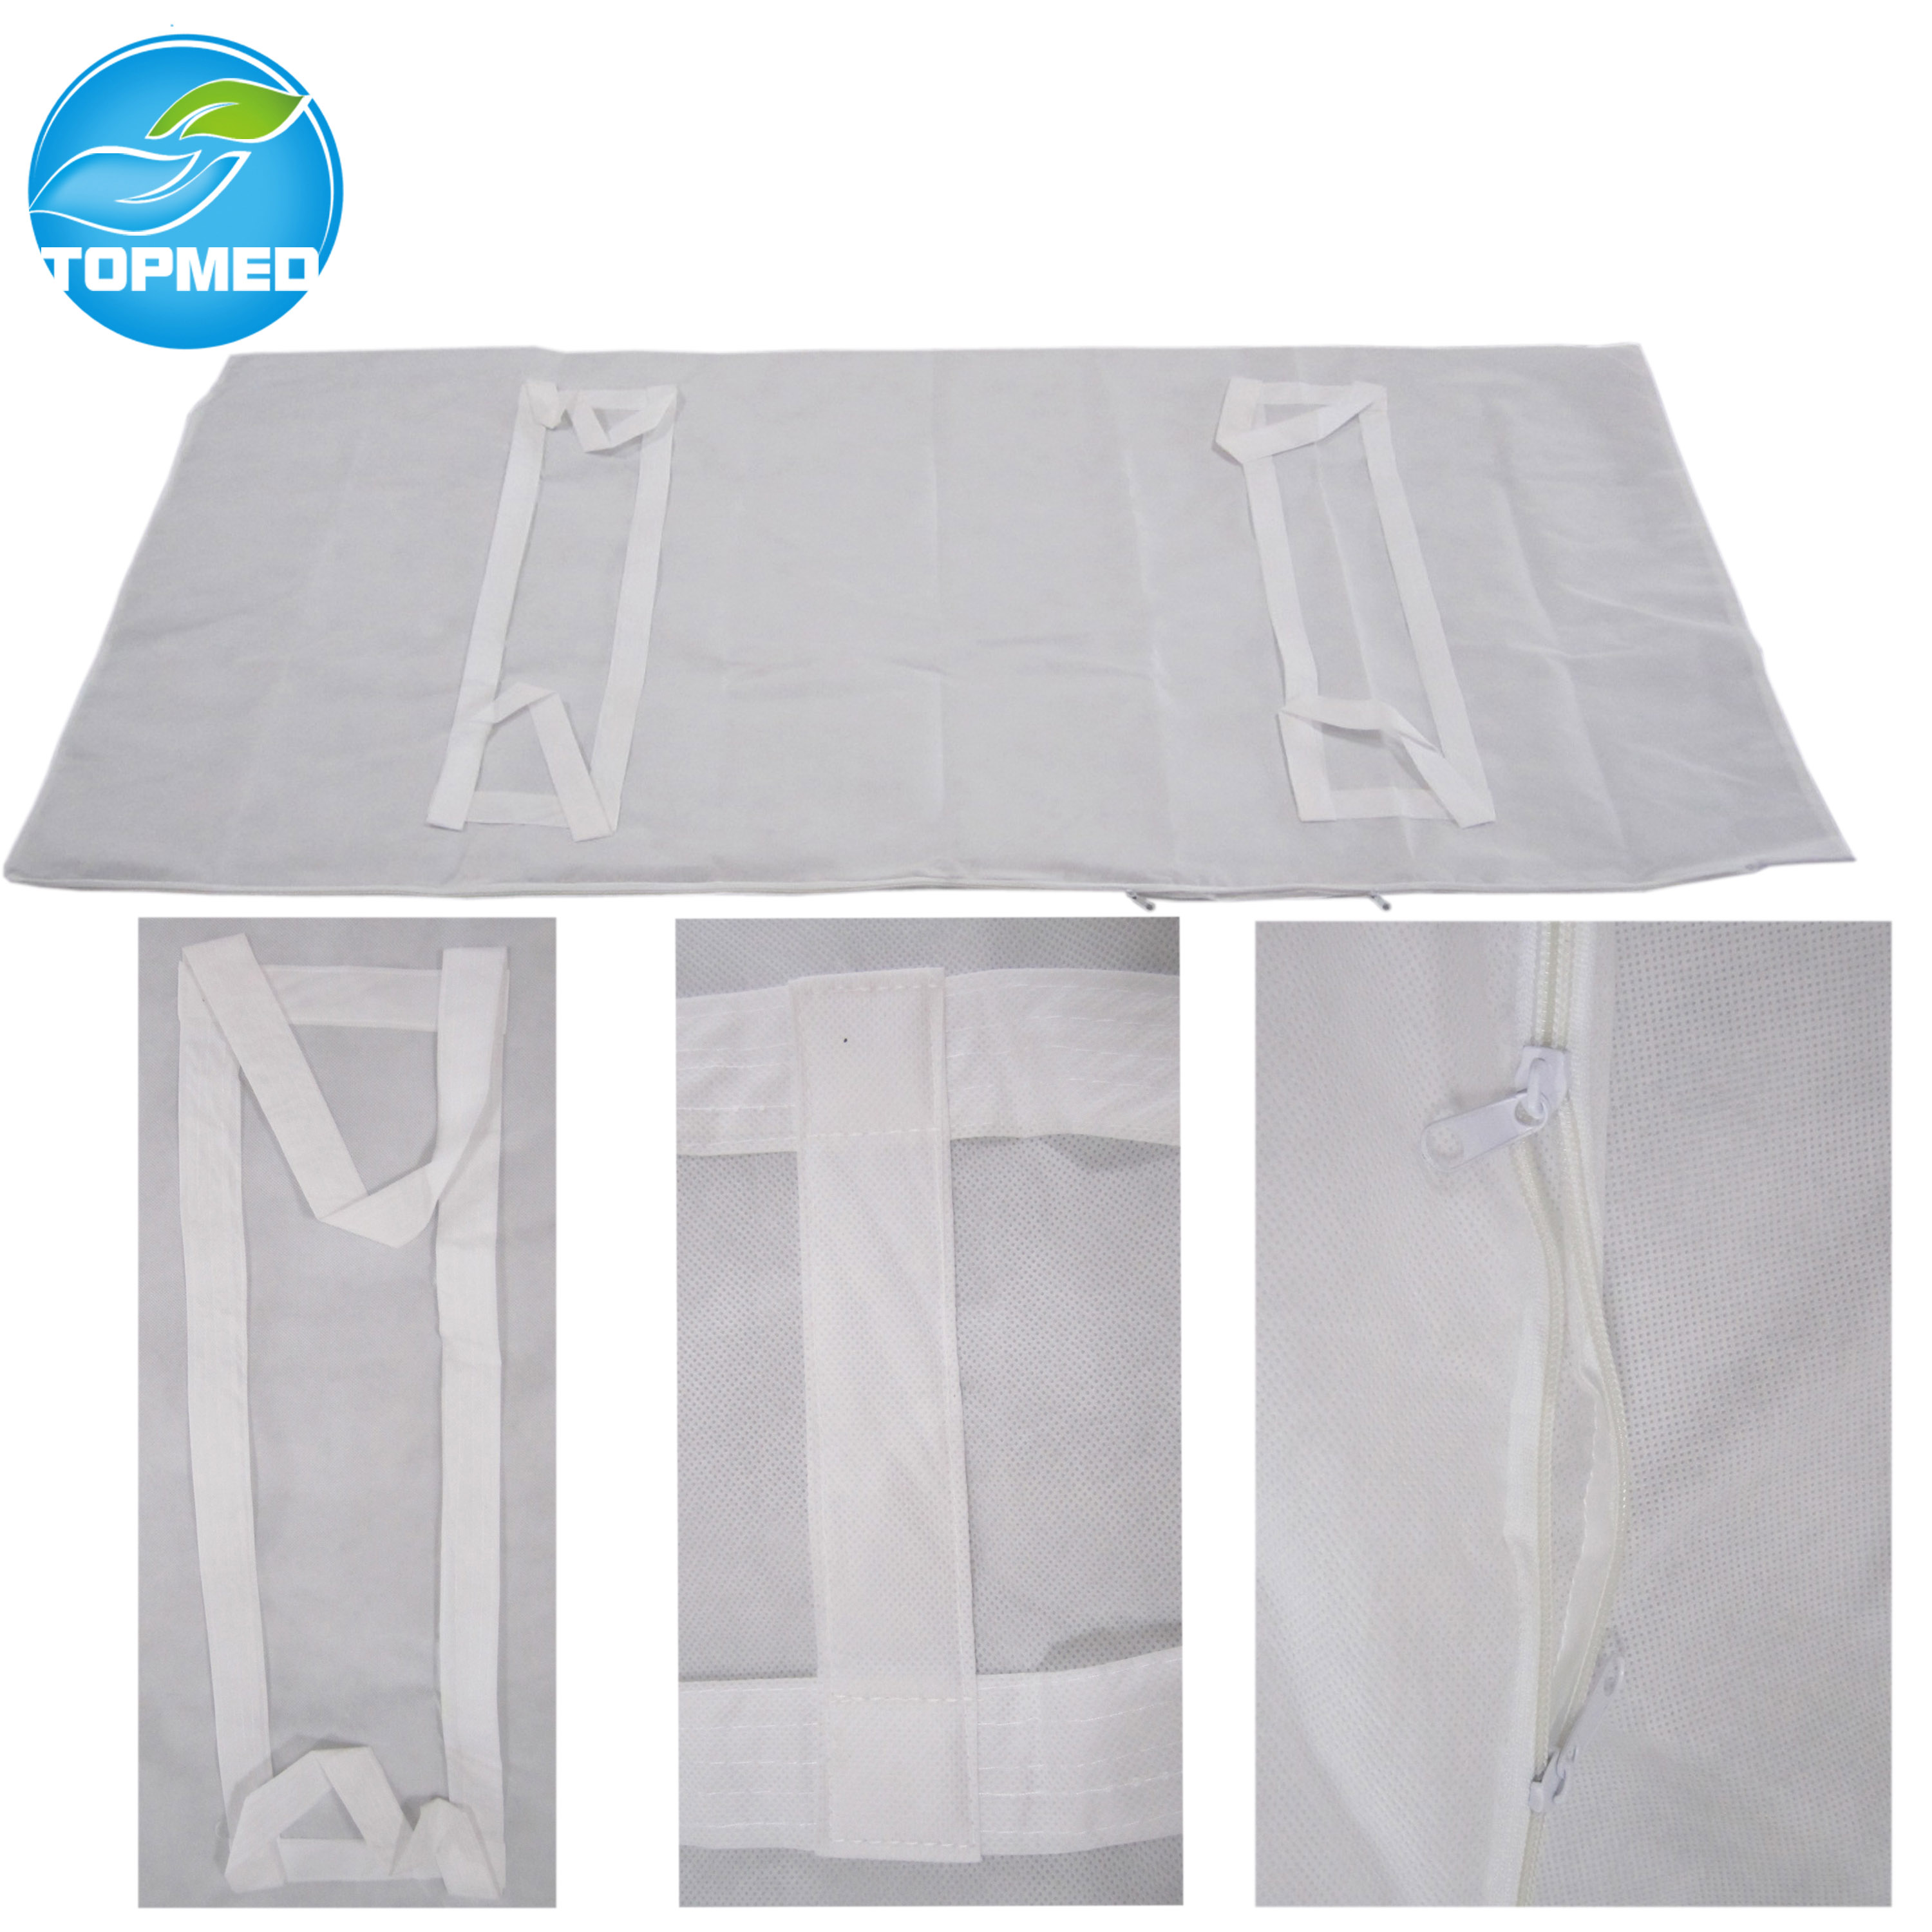 Disposable Nonwoven Medical PP+PE Funeral Body Bag with Heavy Duty Zipper Liquid-proof